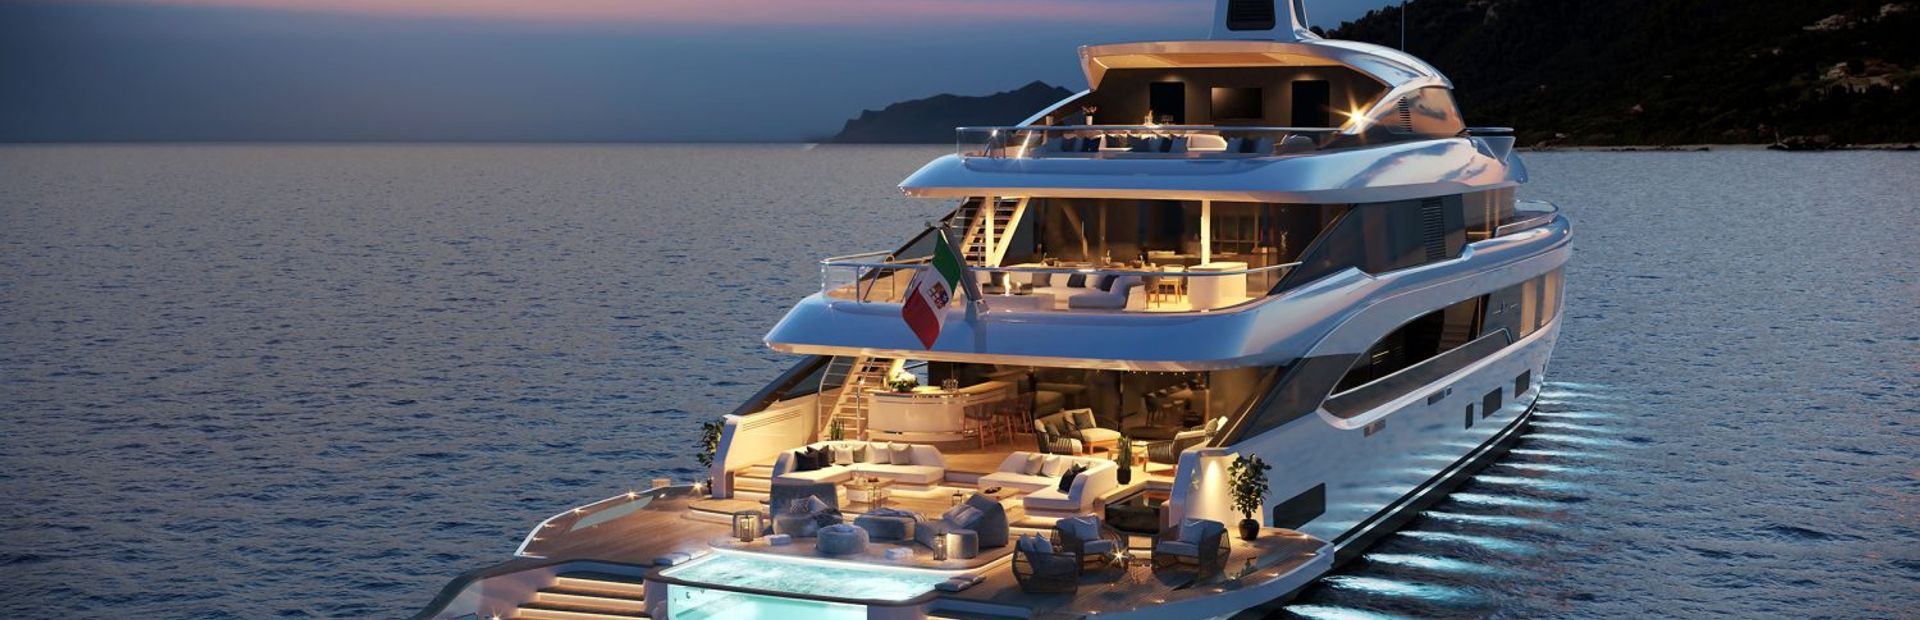 B.Now 60M Oasis Yacht